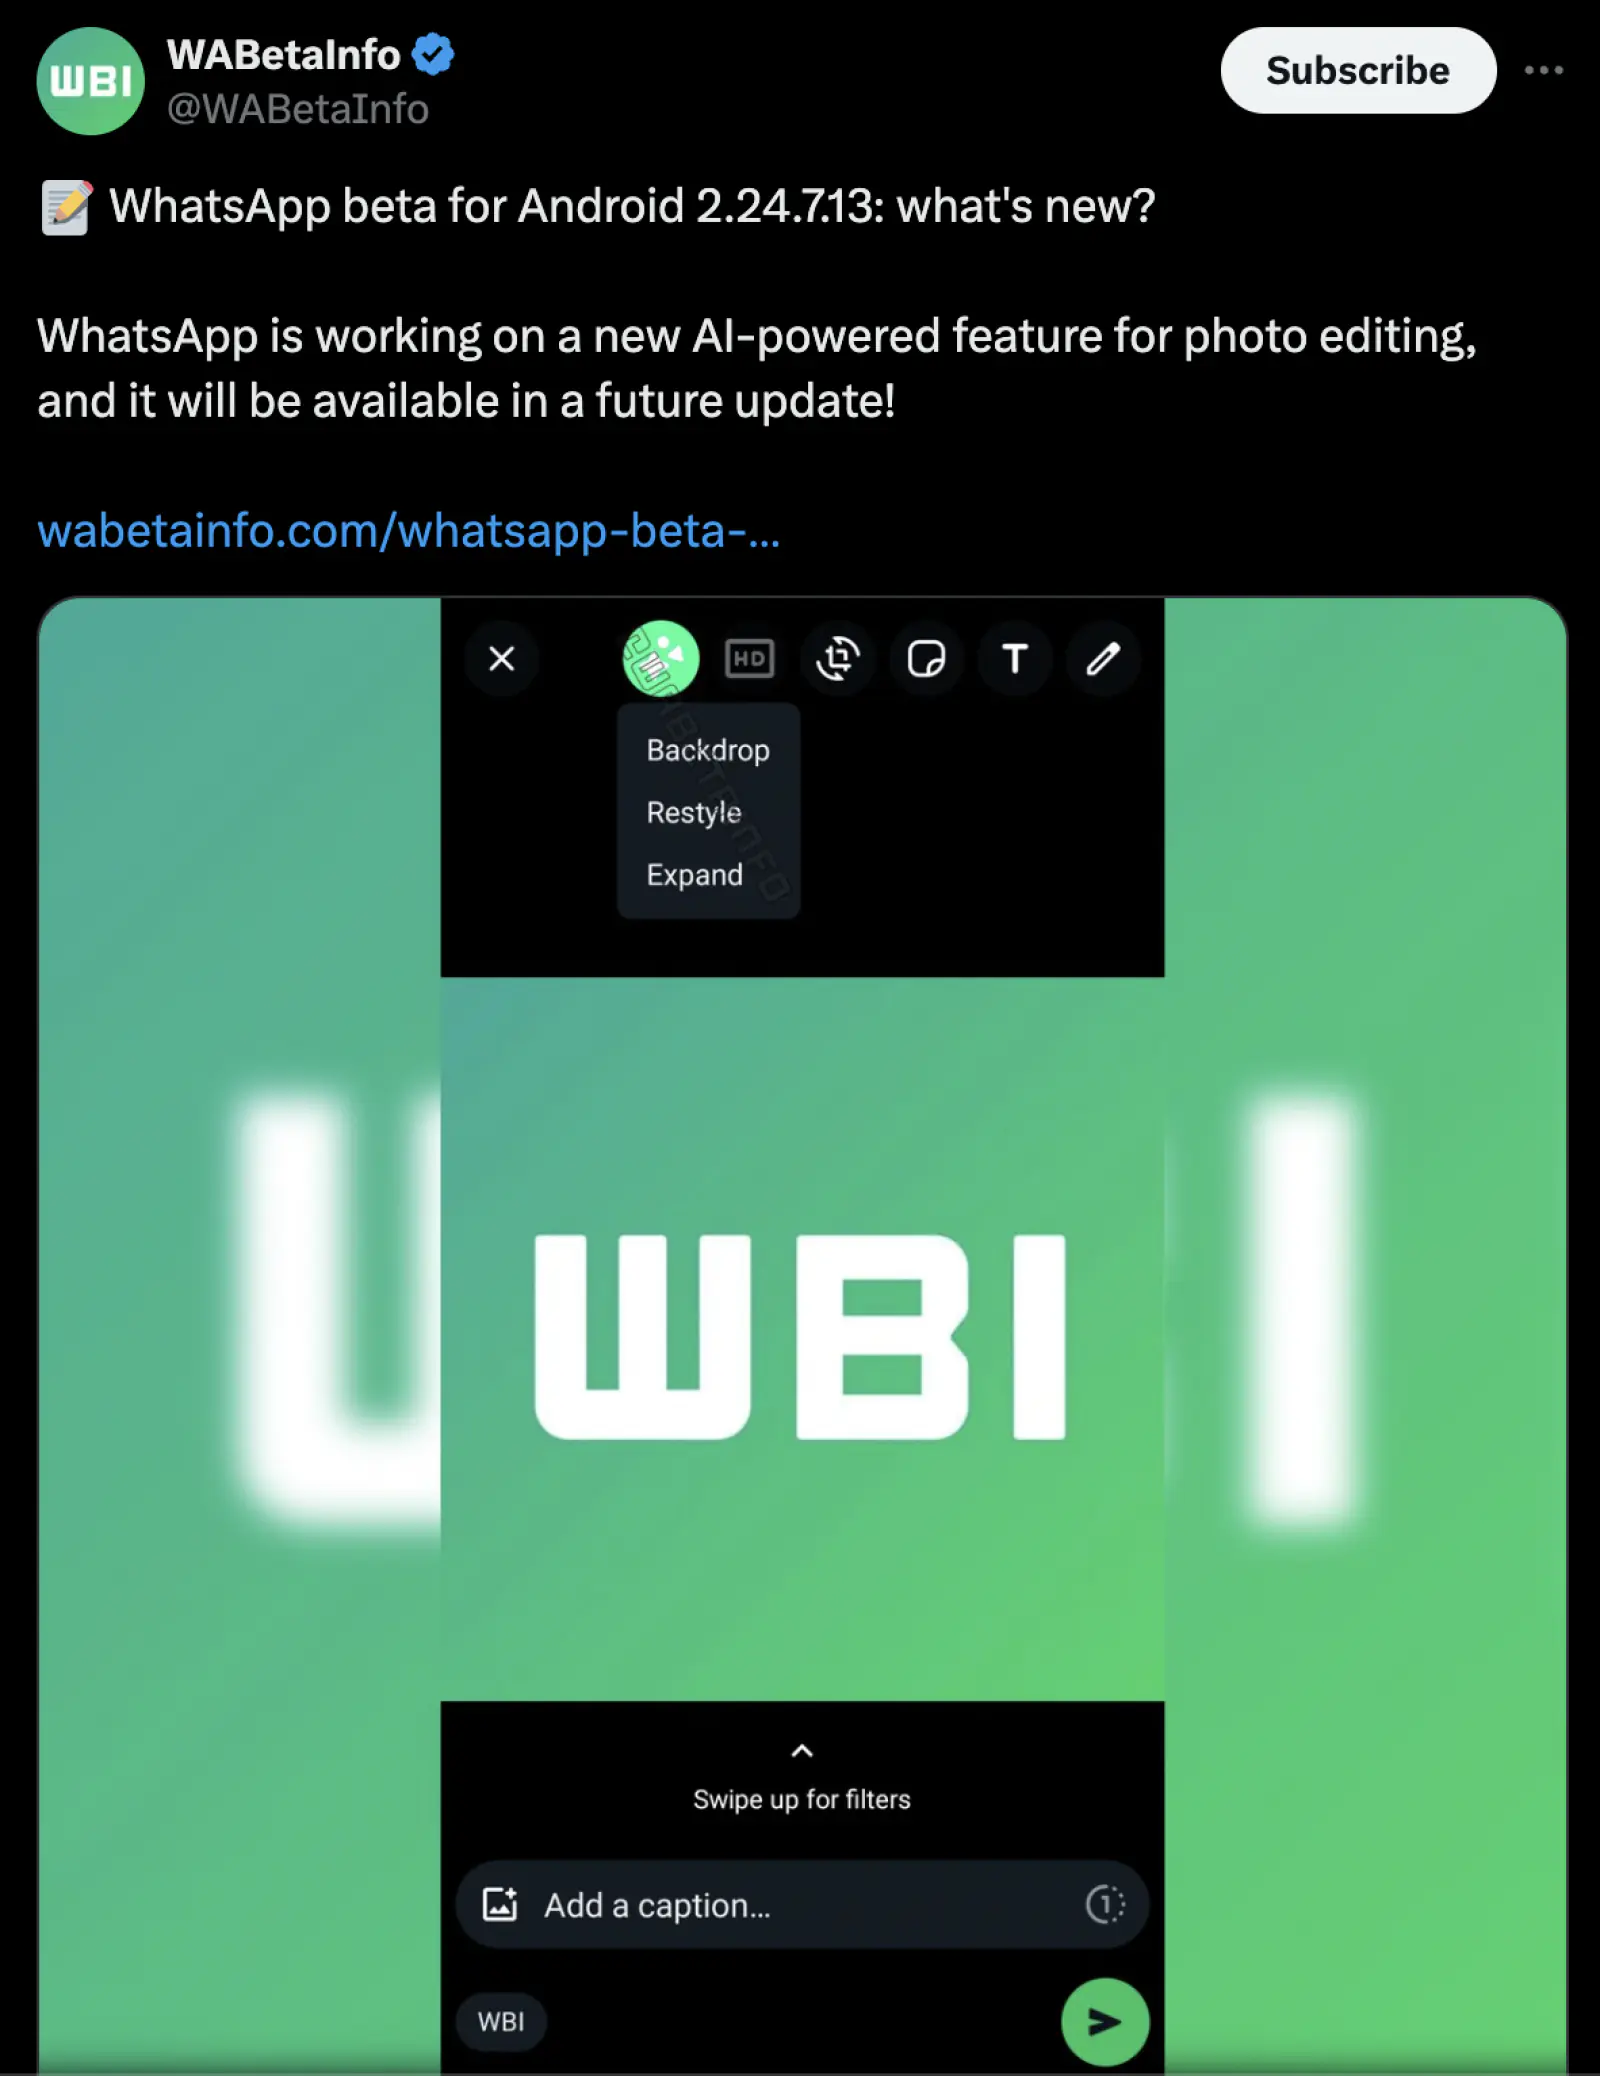 WhatsApp users will soon get AI-powered editing feature, they will be able to edit images as per their choice